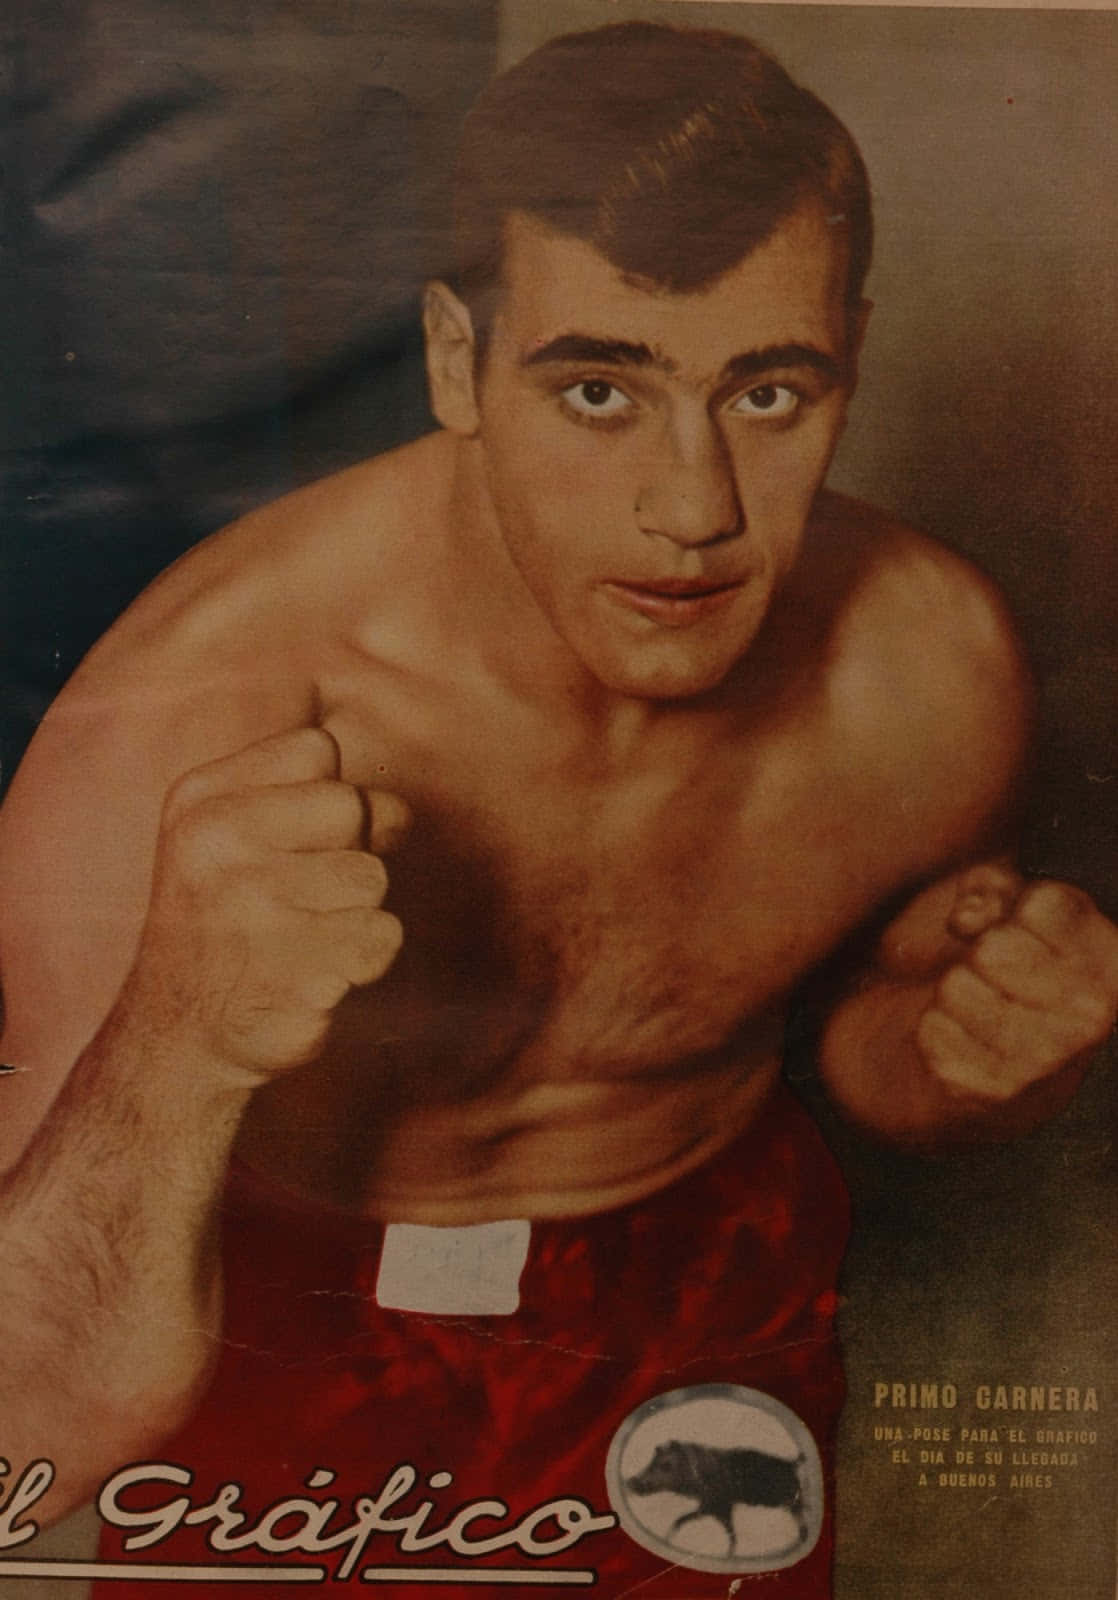 Italian Professional Boxer Primo Carnera Red Shorts Poster Picture